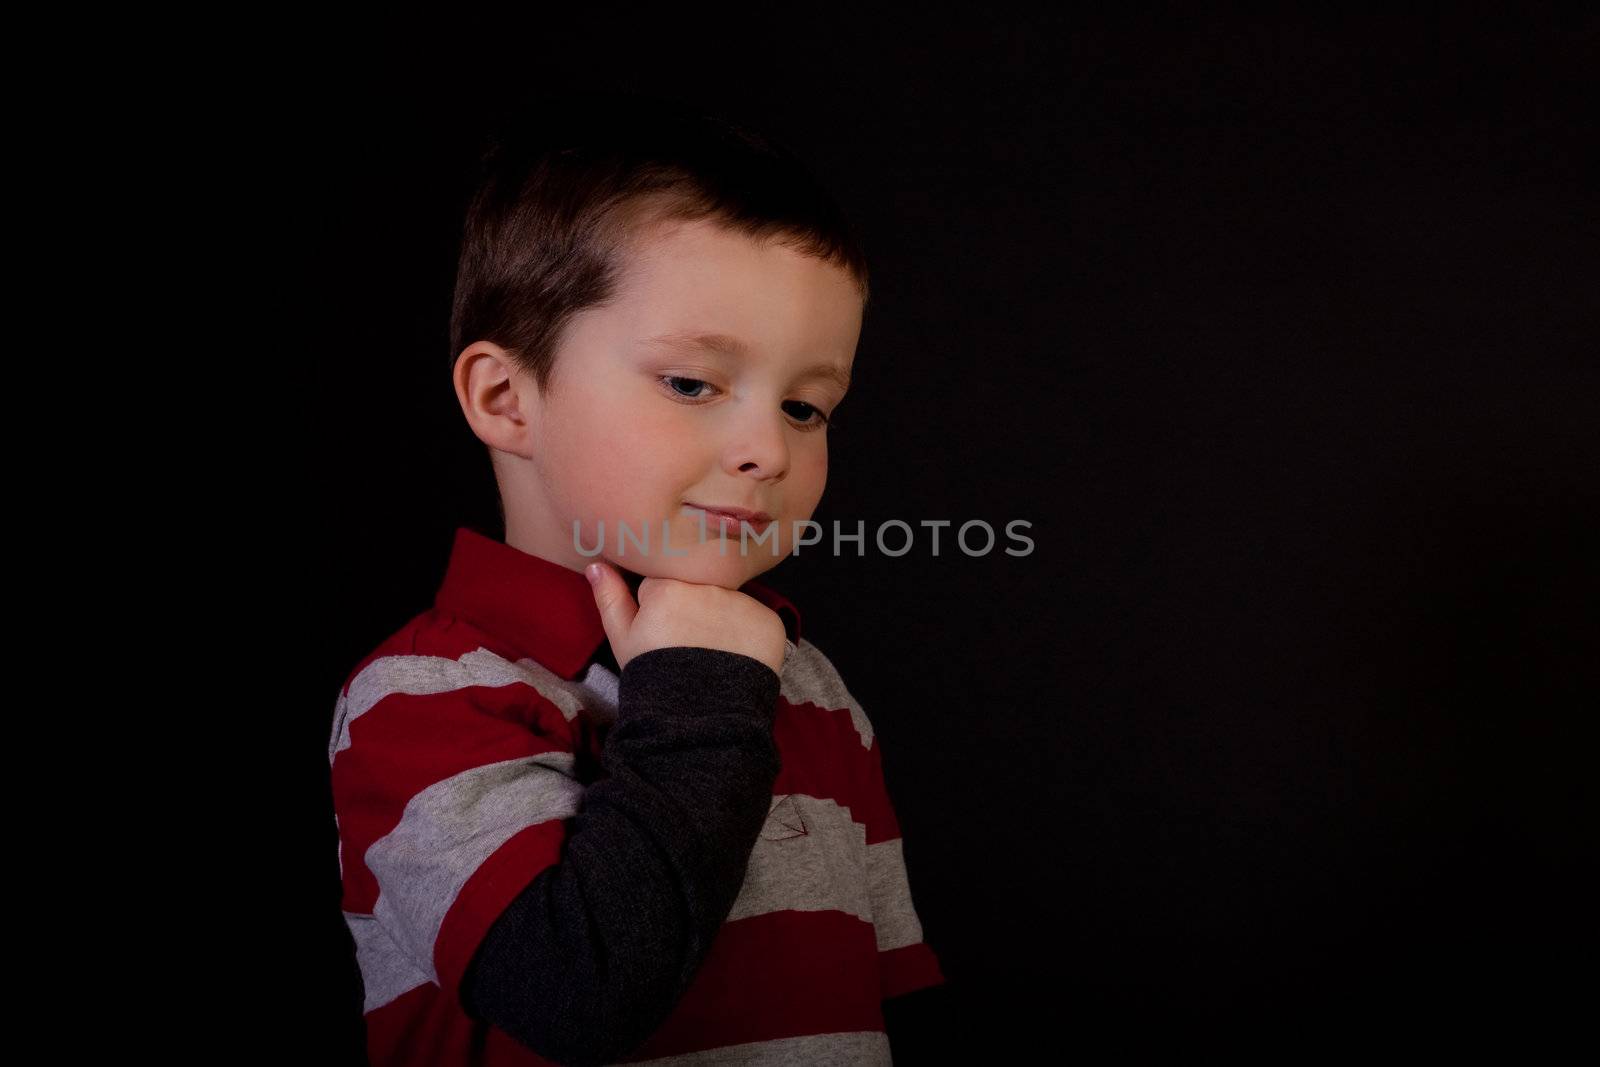 Thoughtful little boy by Talanis